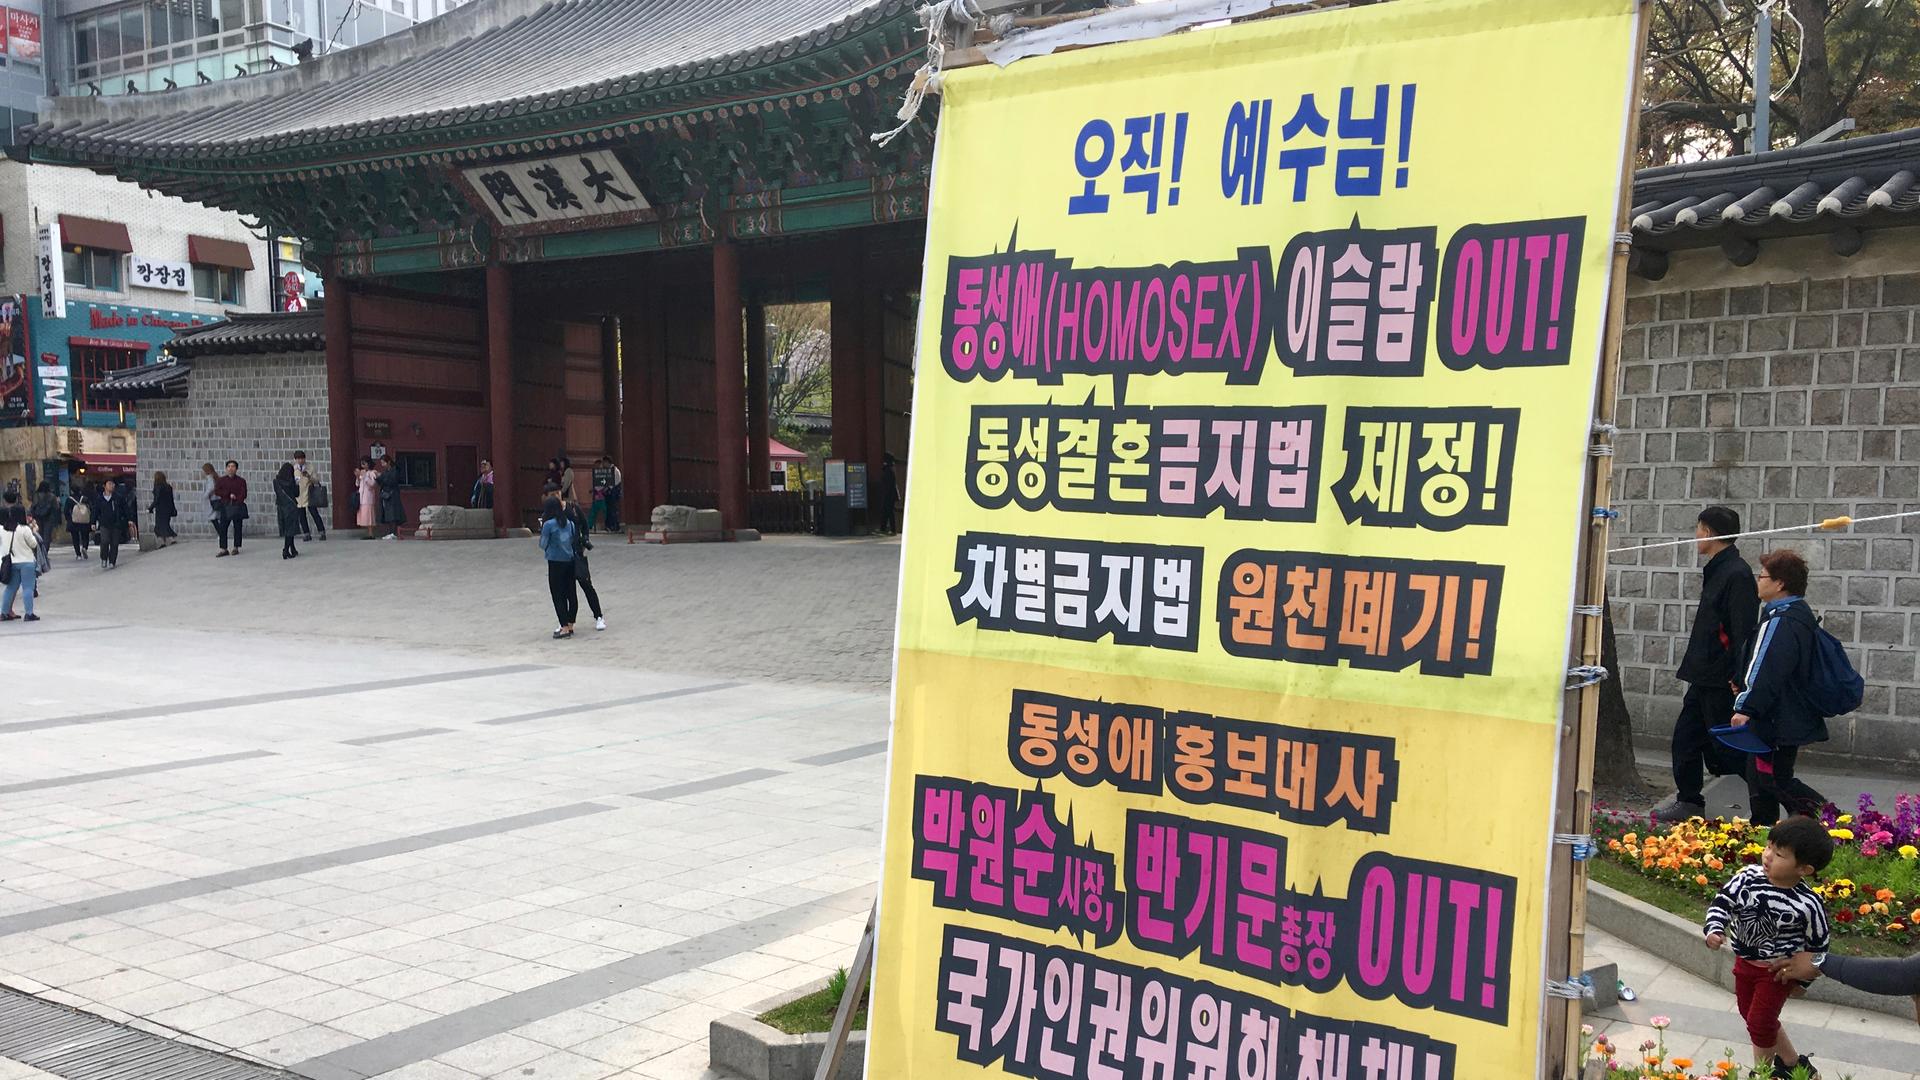 Anti-gay signs of a Christian group were on display in front of the Deoksugung Palace in downtown Seoul city on April 13, 2017. 